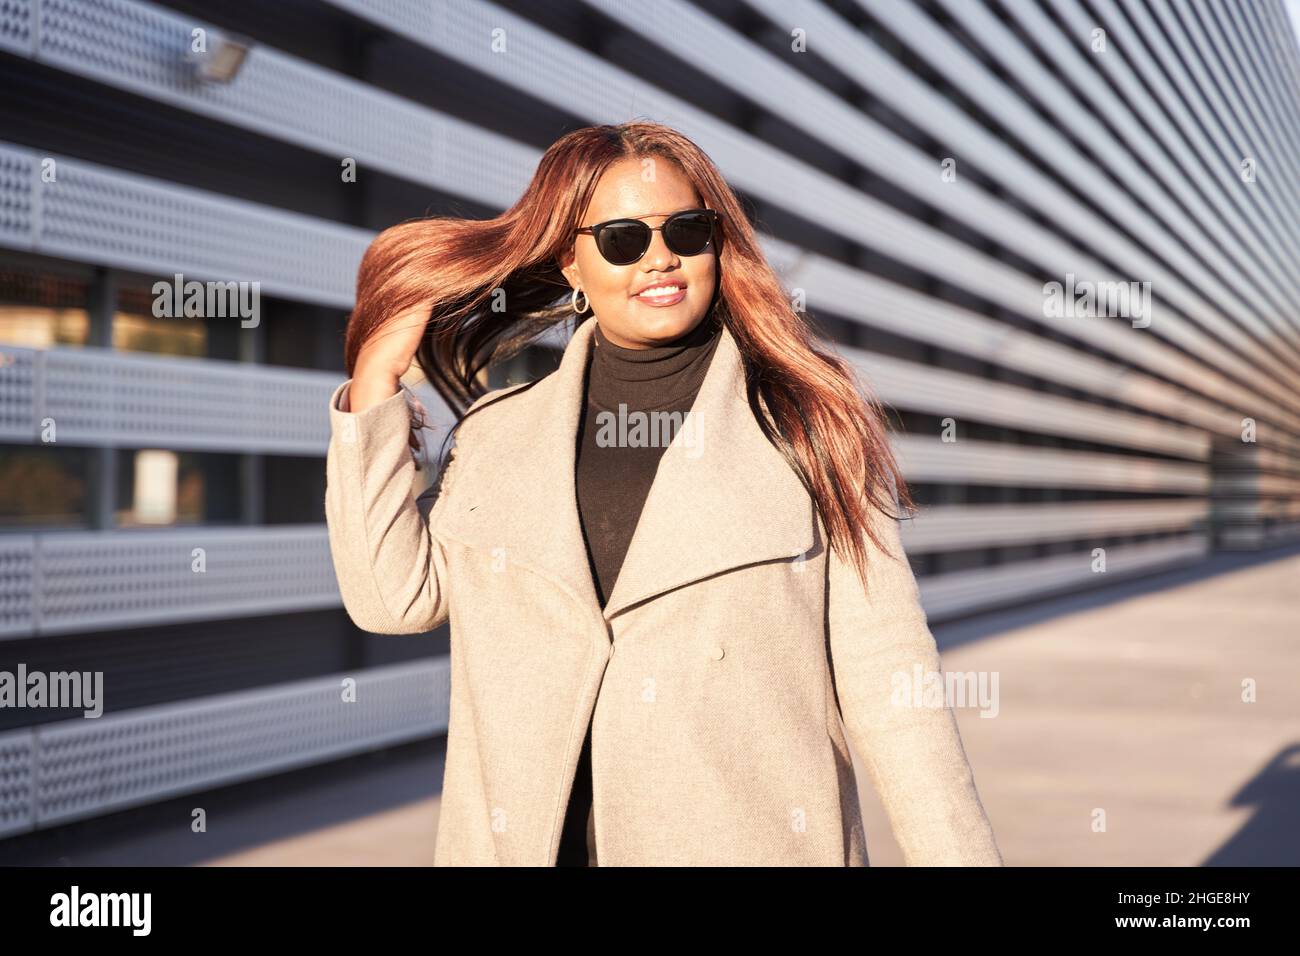 African-American woman wearing sunglasses. The successful young woman is wearing a business suit. She walks powerfully while combing her hair to one s Stock Photo